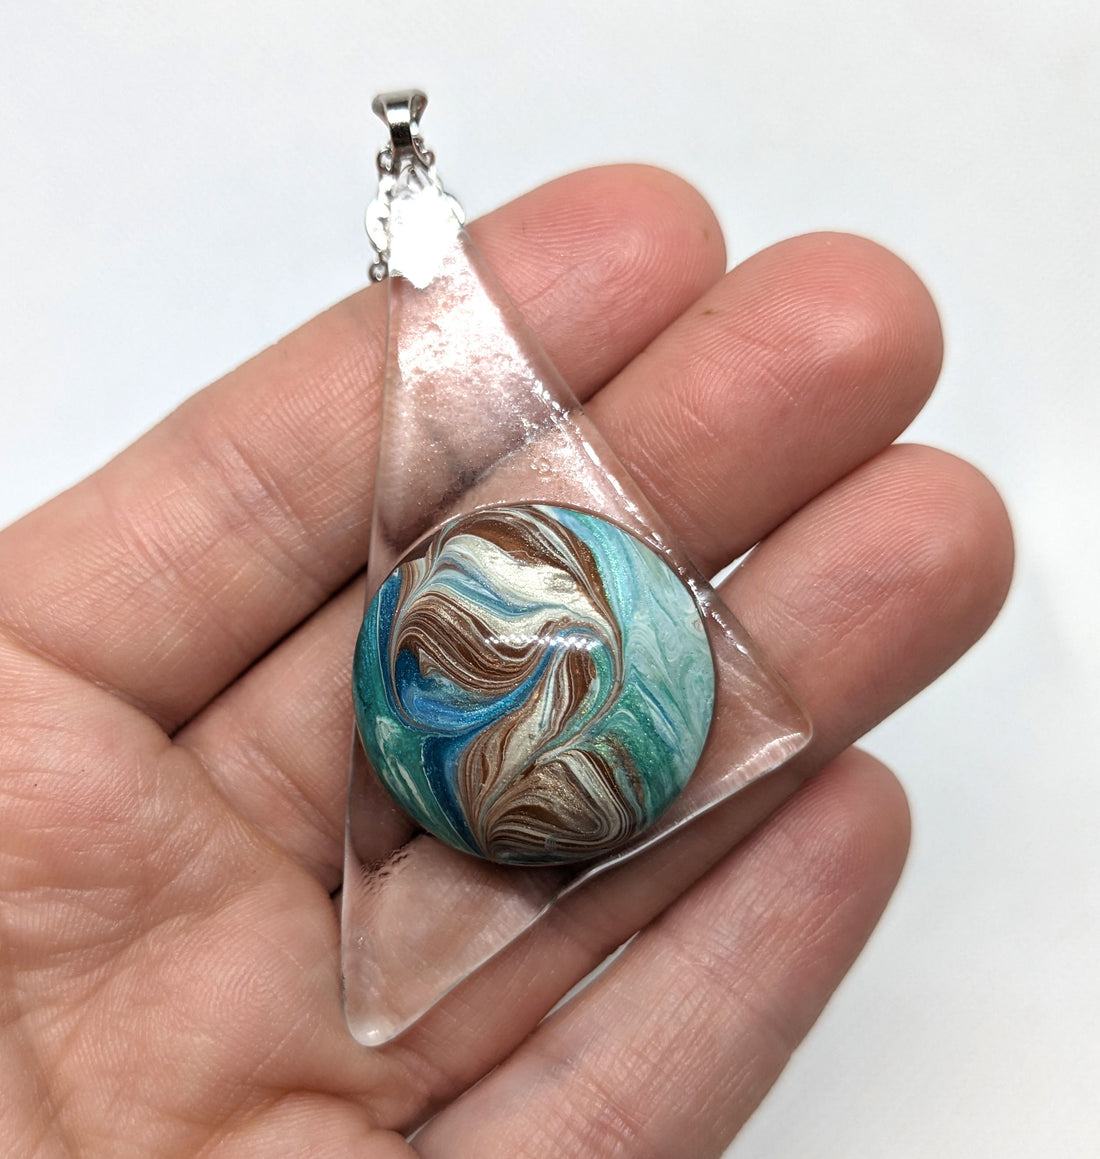 Fused glass | acrylic paint skins | resin necklace